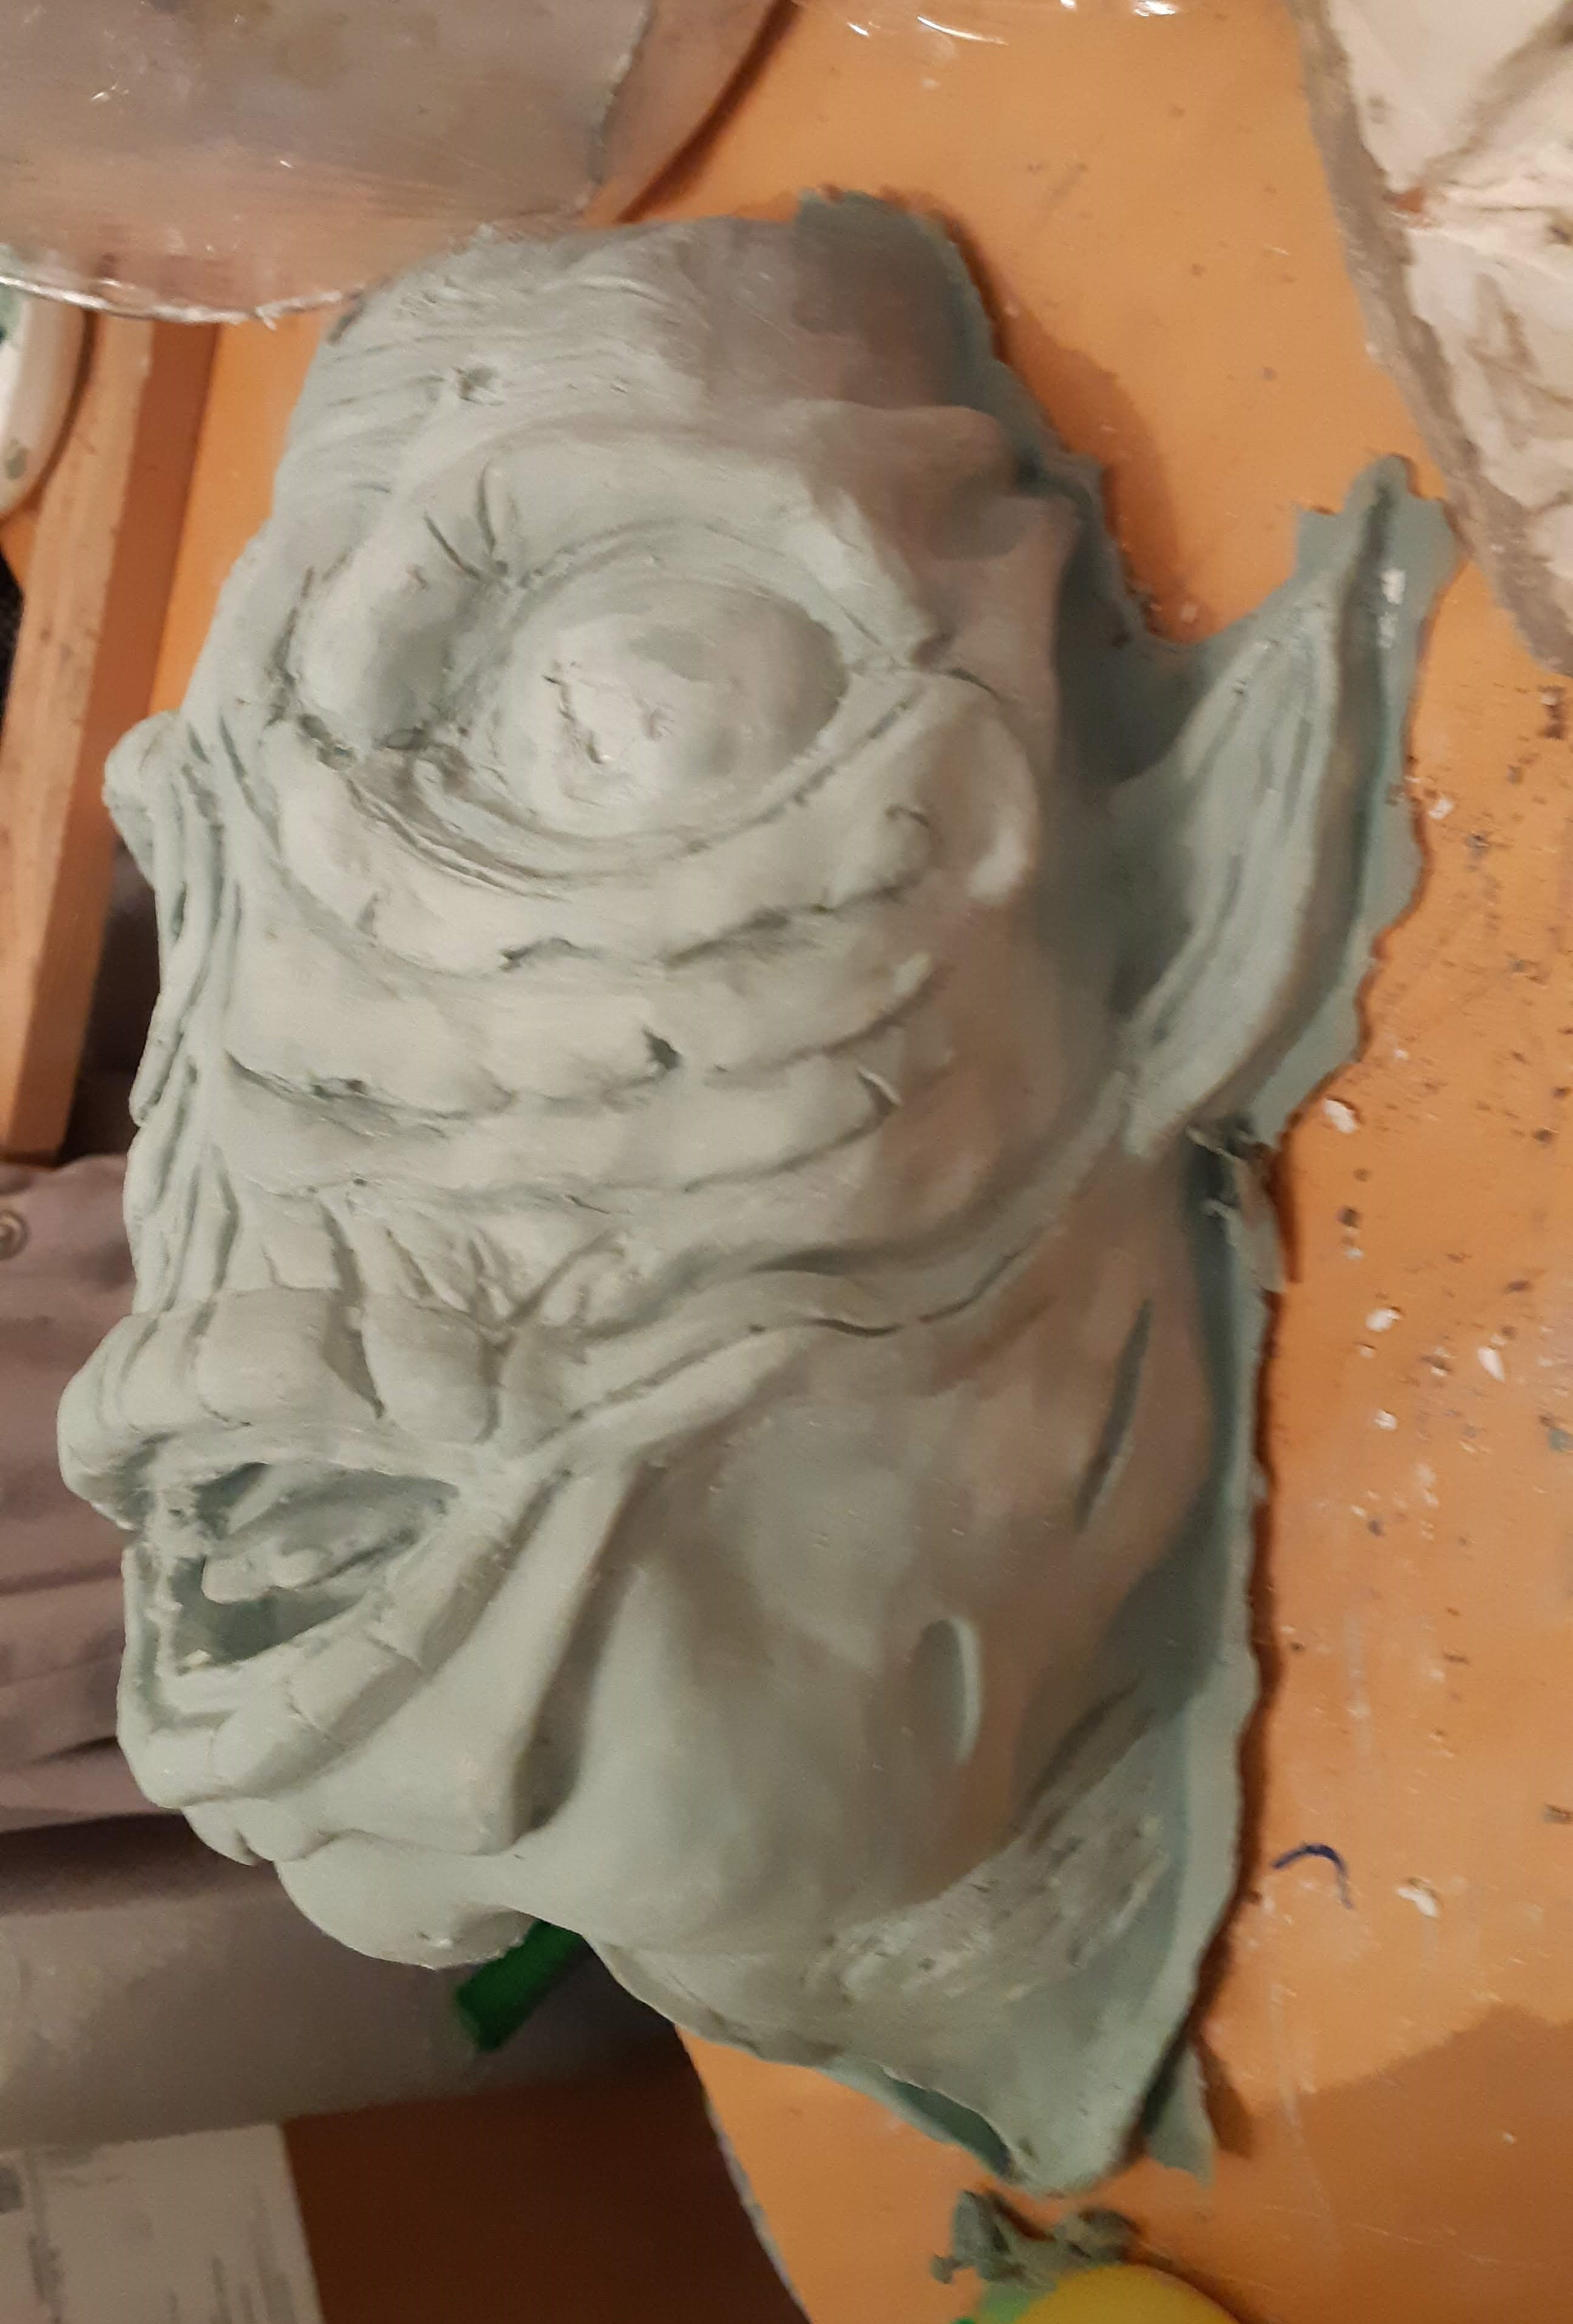 Dyed latex mask after casting